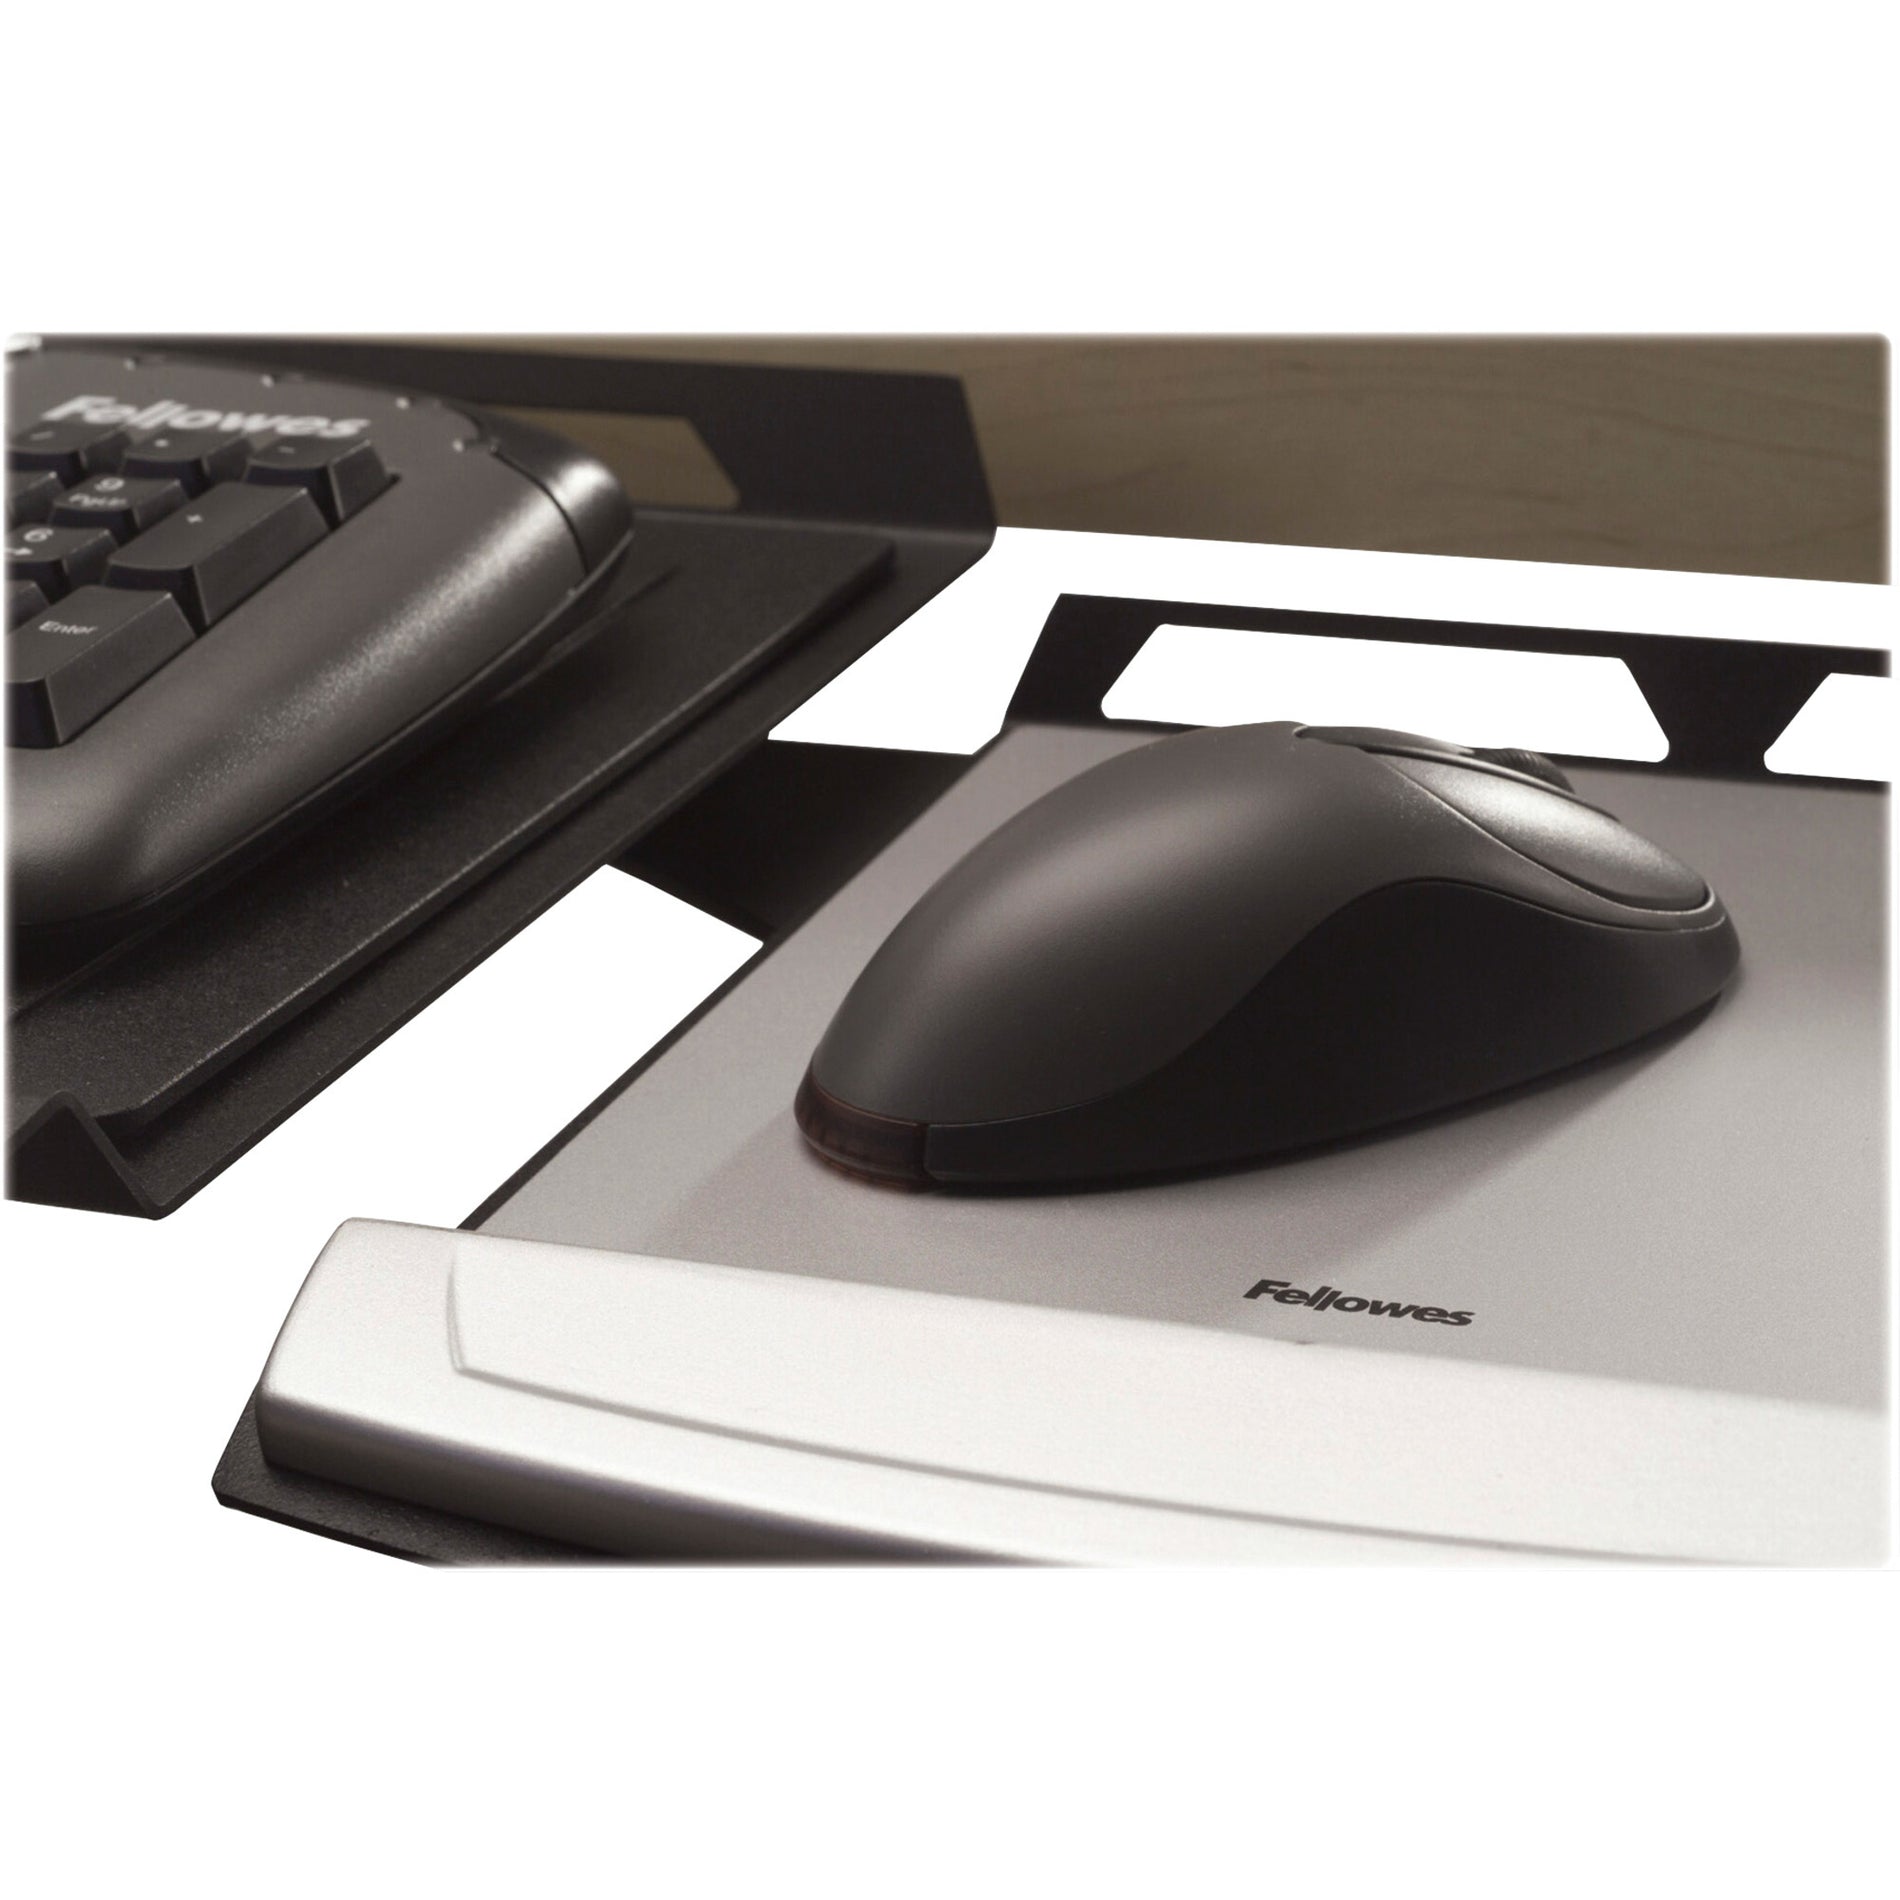 Fellowes 8031301 Office Suites Keyboard Tray, Adjustable and Space-Saving with Gel Wrist Support